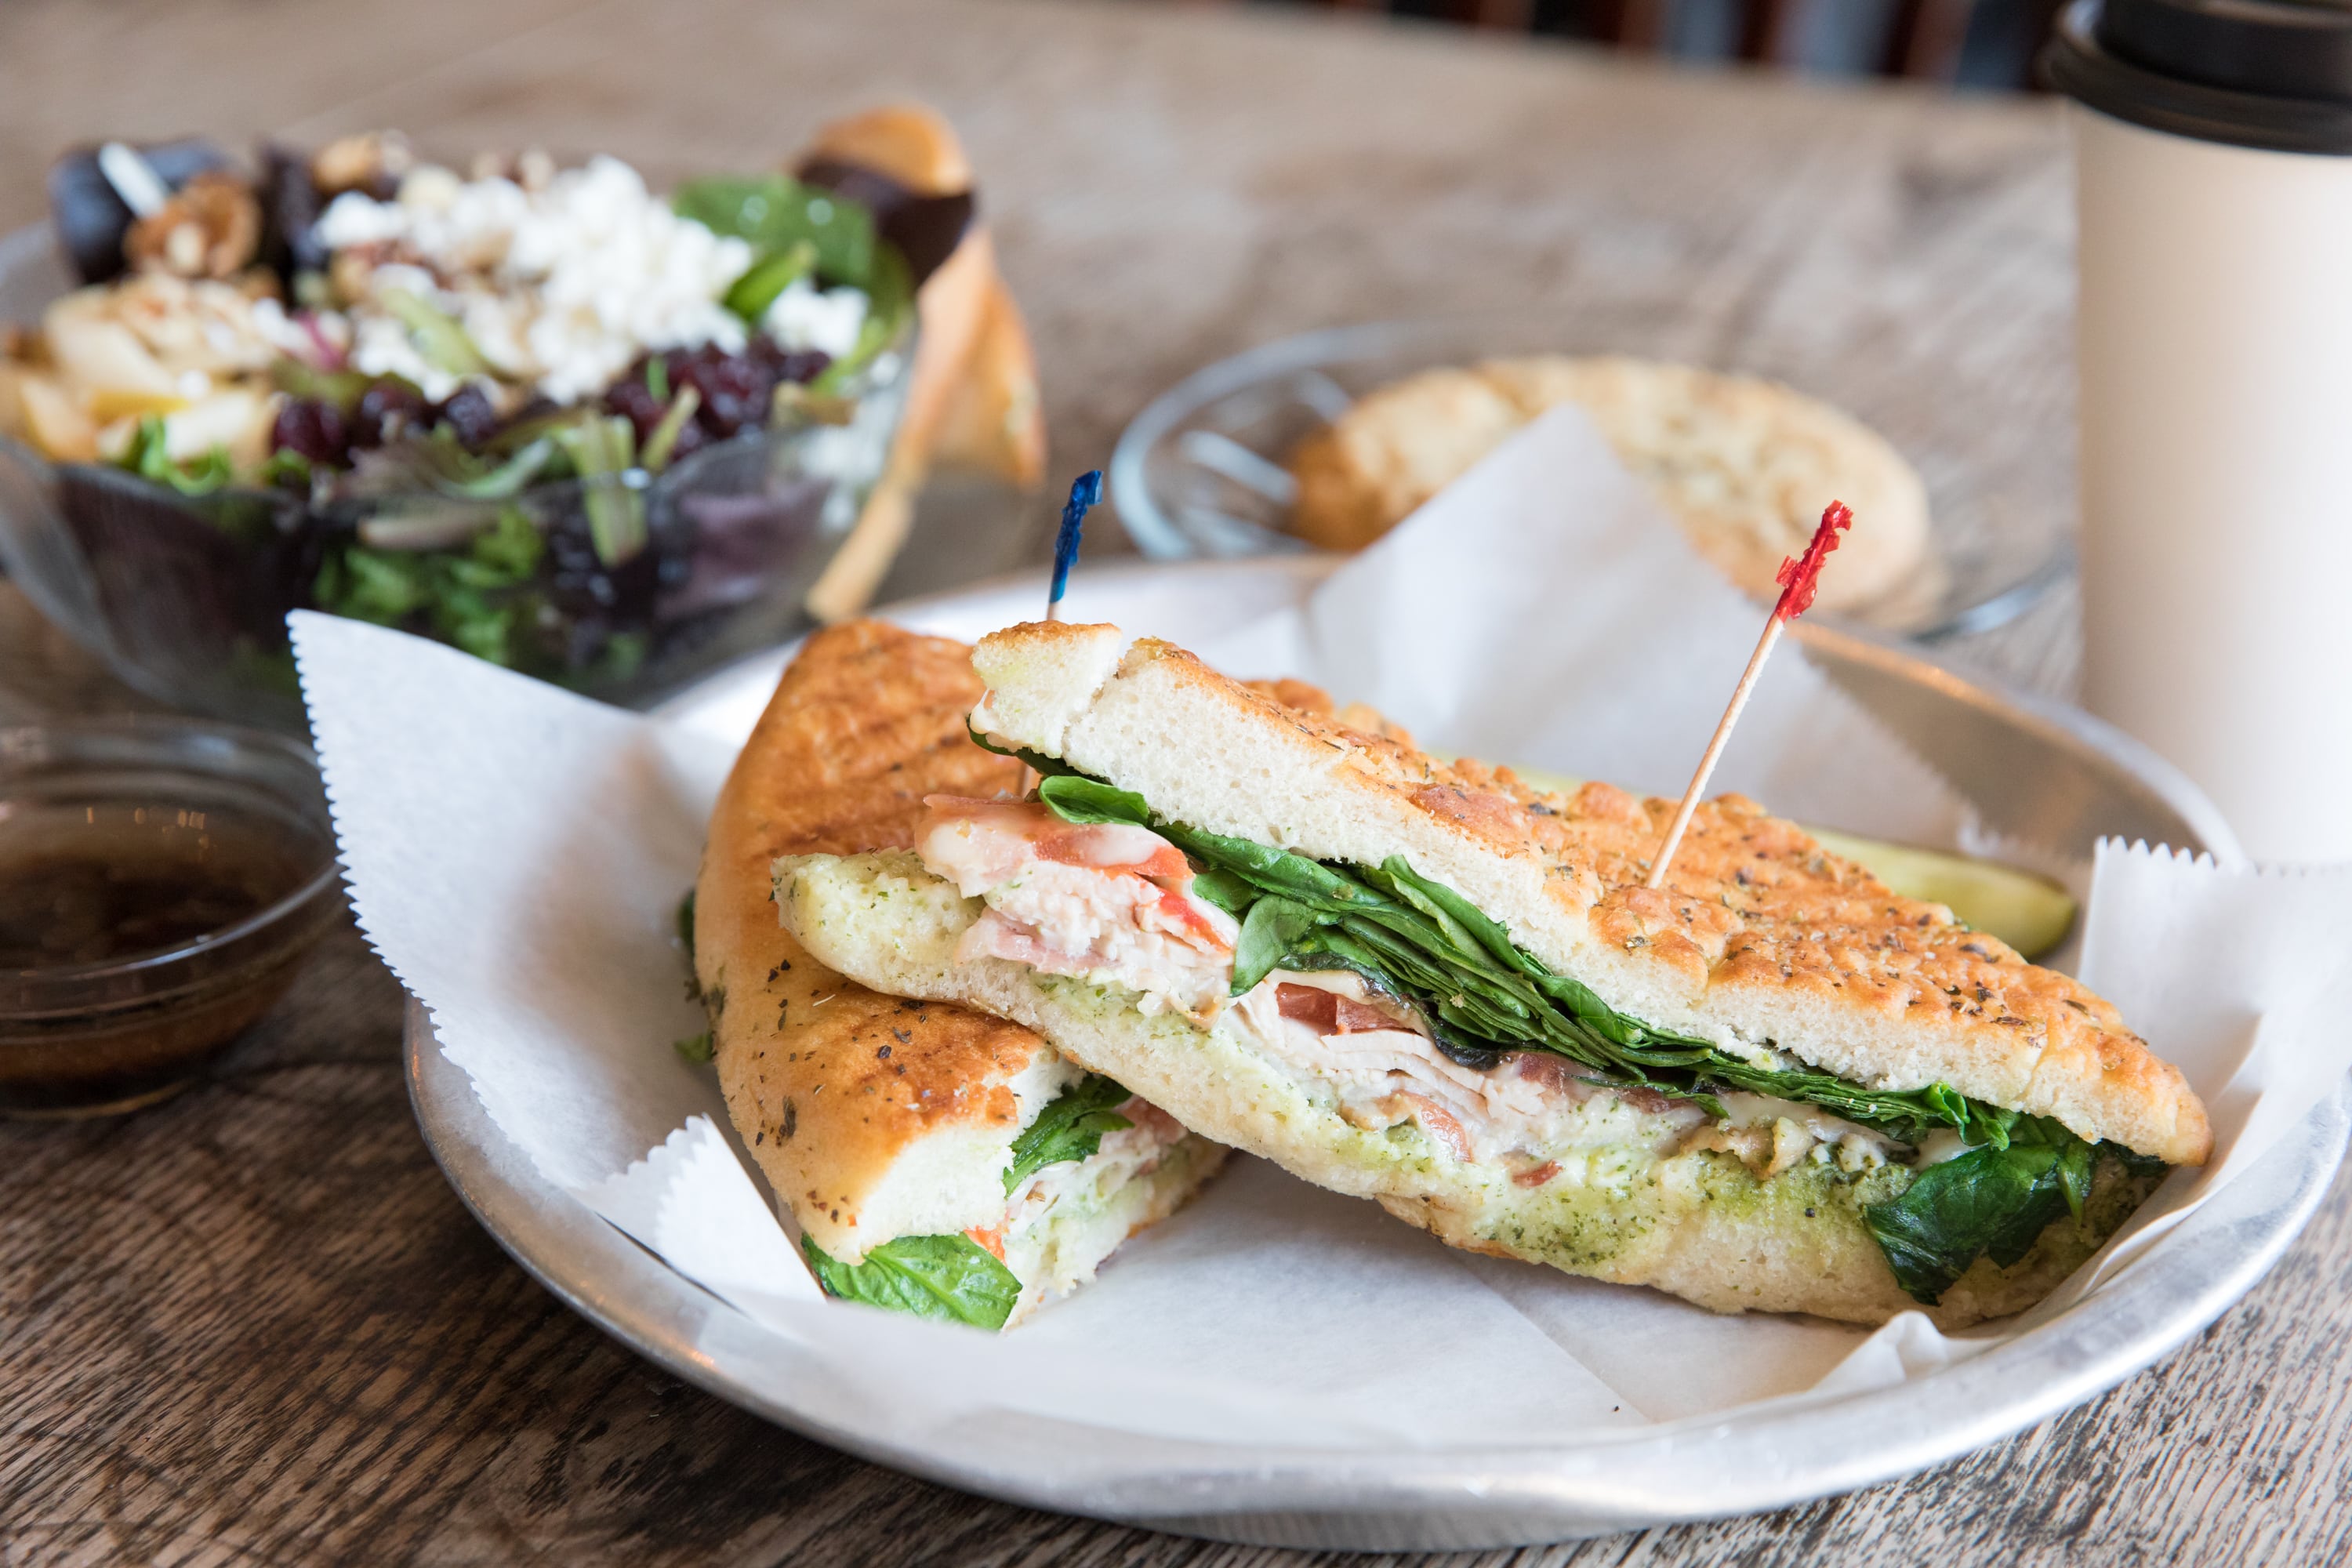 Check out this sandwich and others, all part of Chicago's best sandwich catering spots.